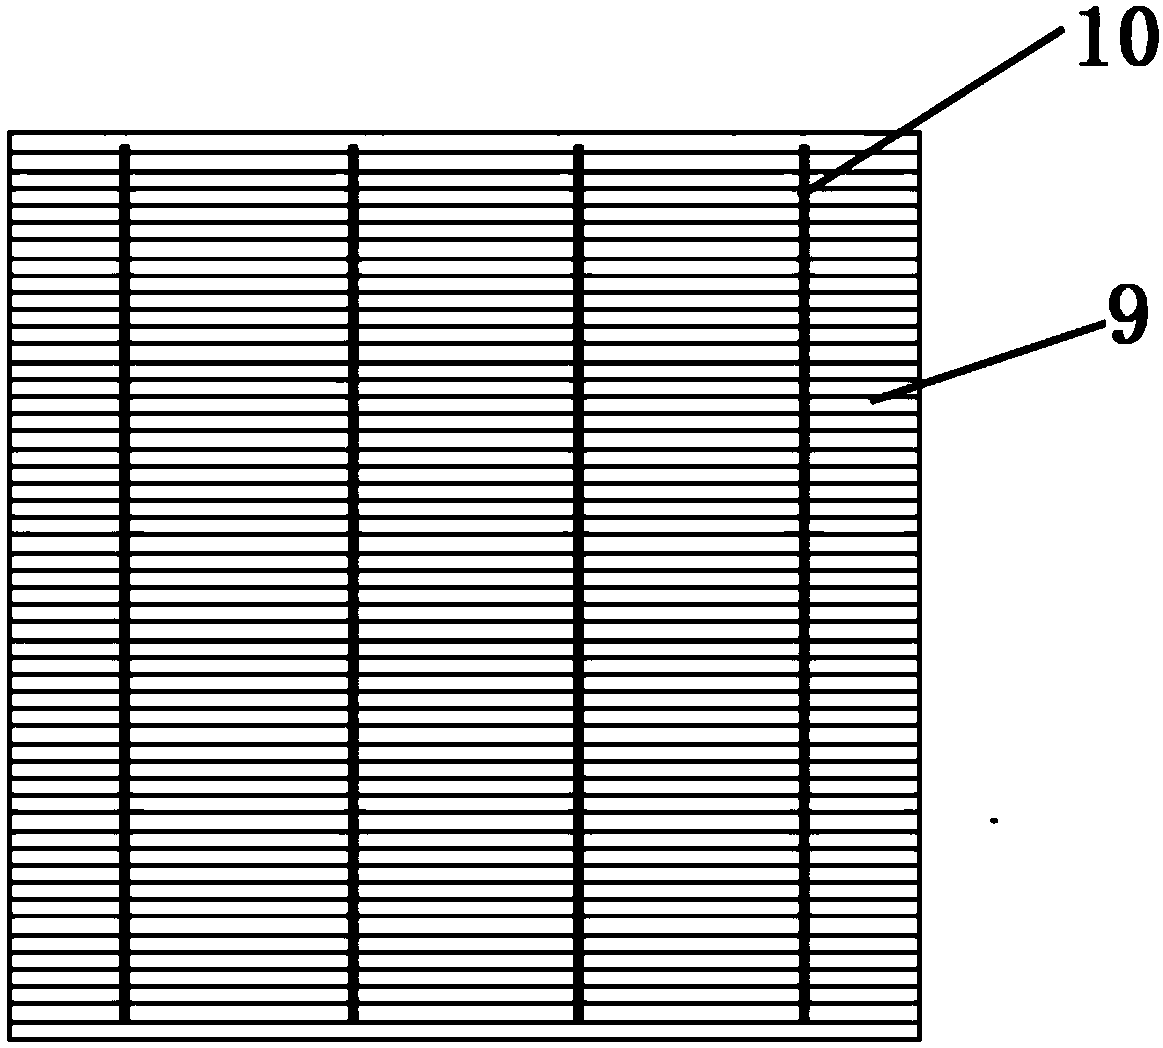 Polycrystalline gallium-doped back passivation solar cell and preparation method thereof